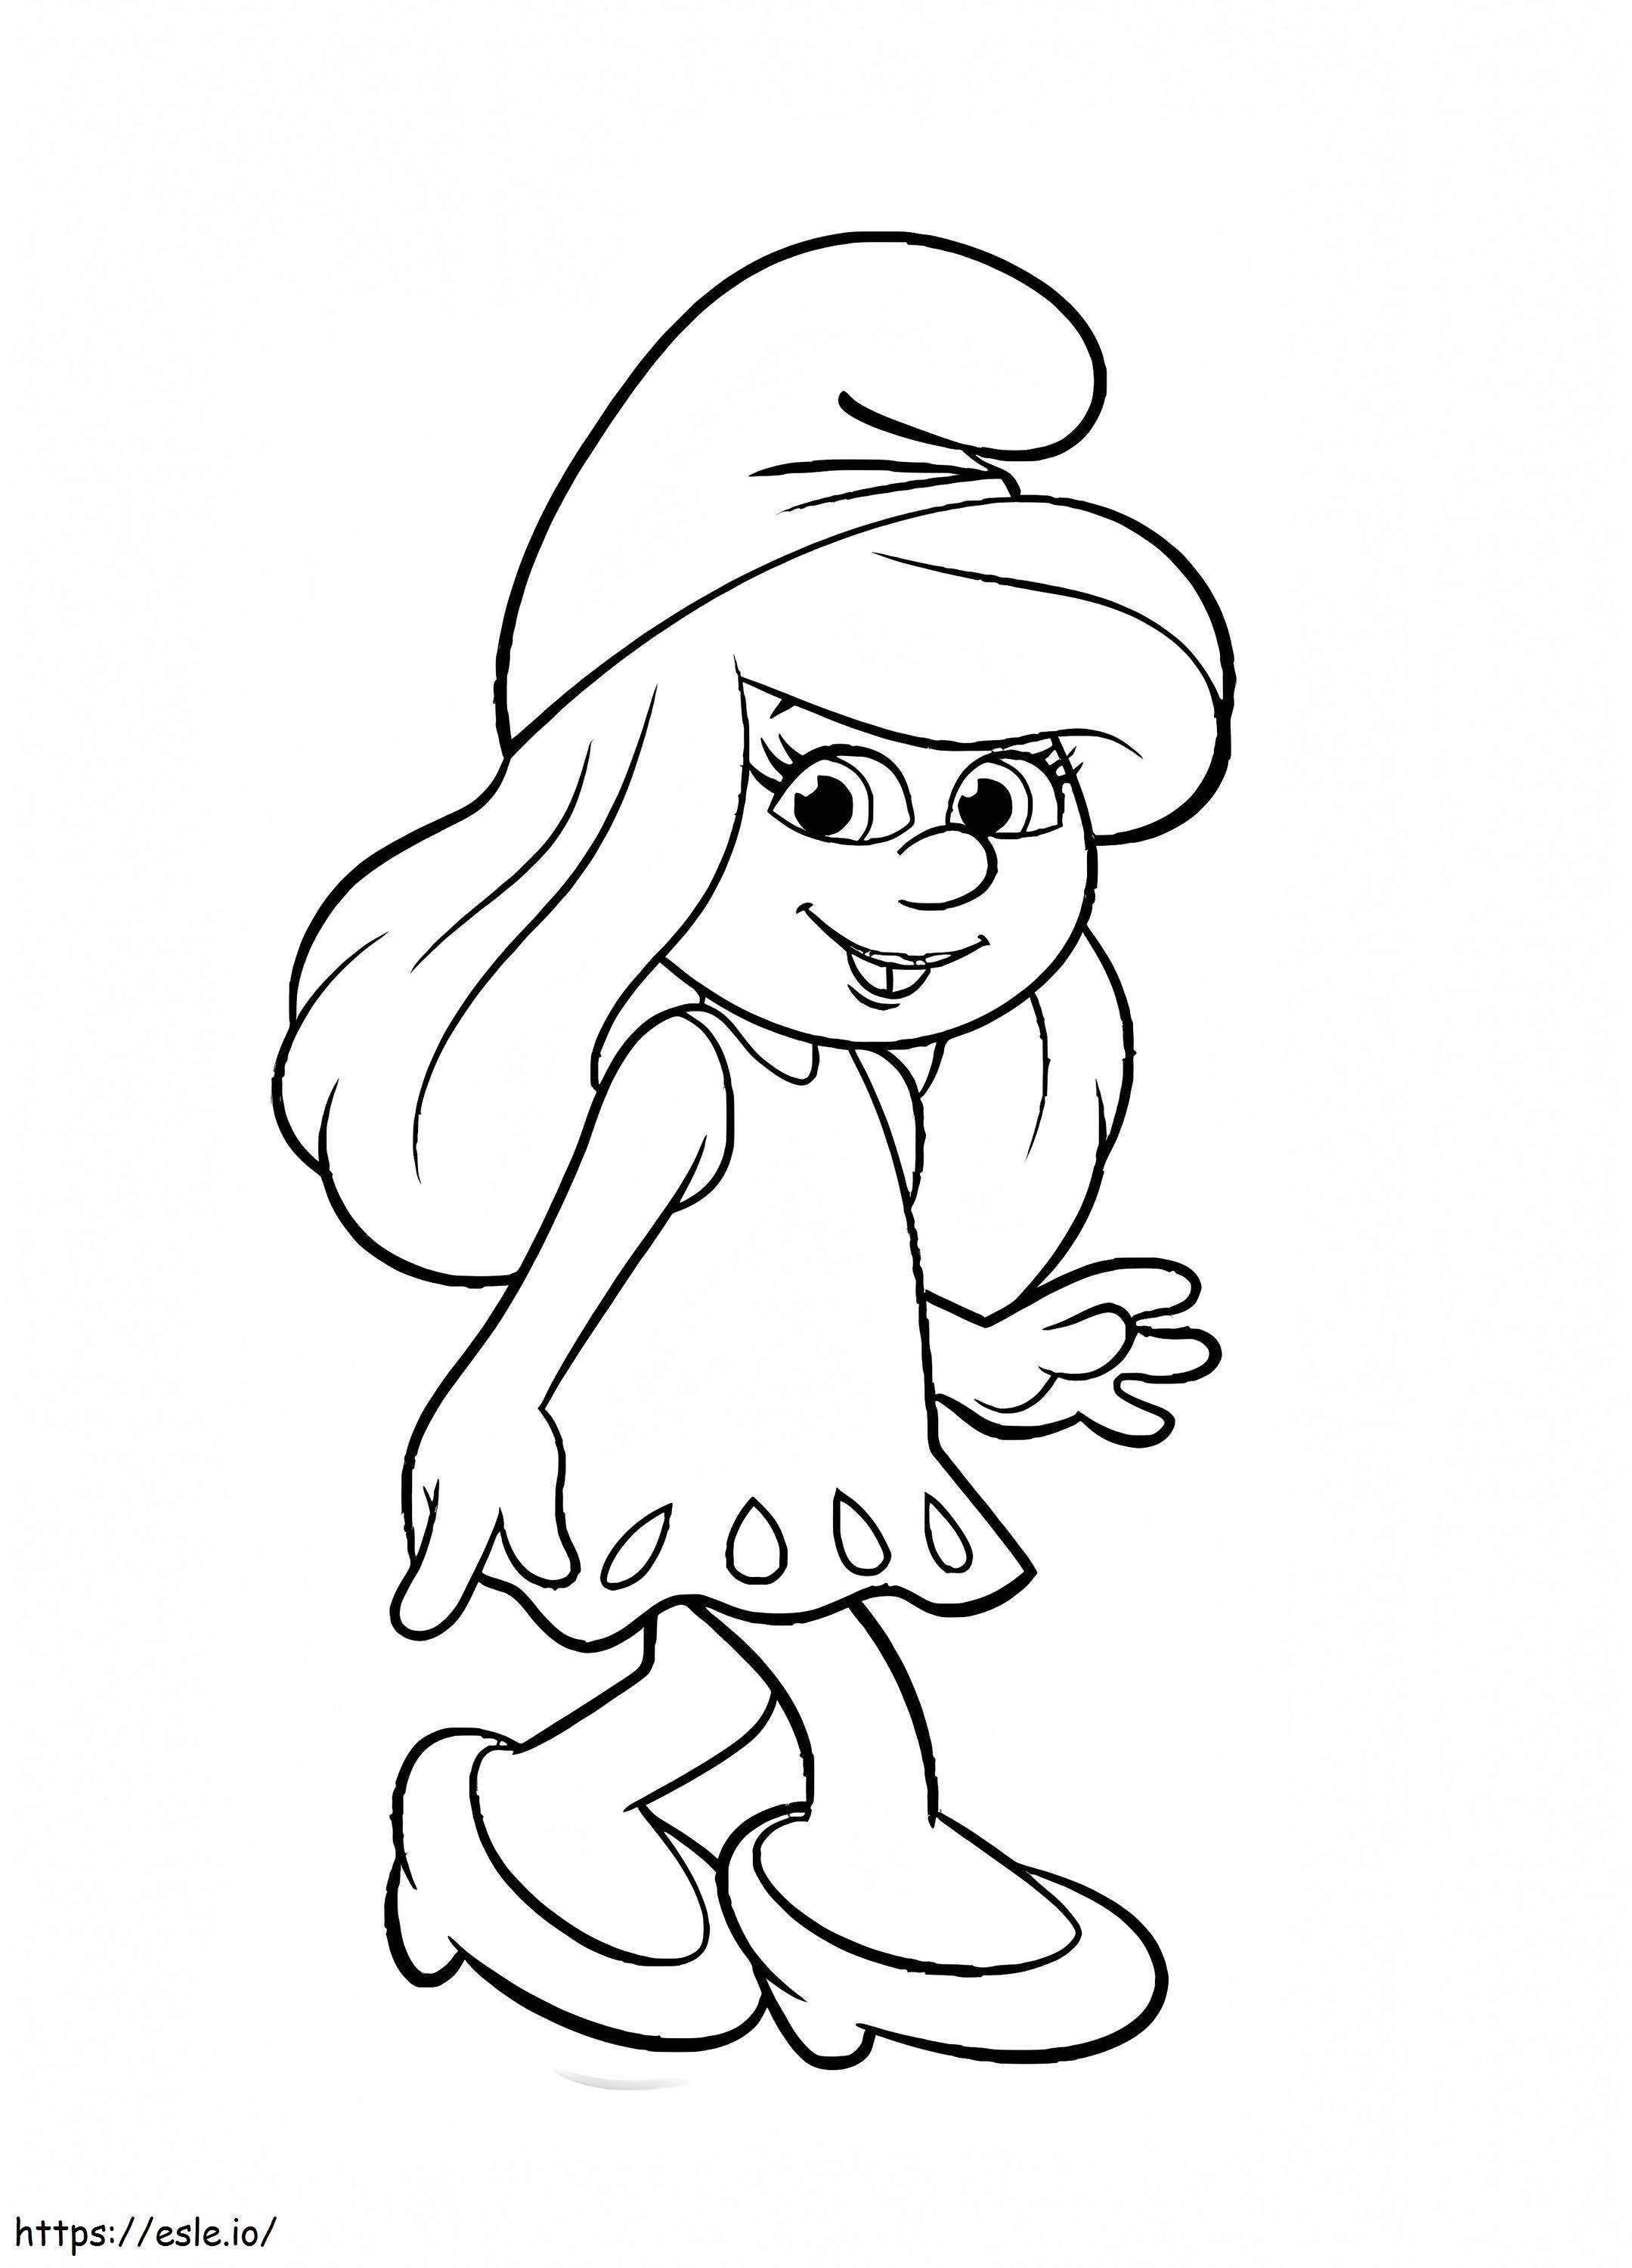 Smurfette Walking coloring page